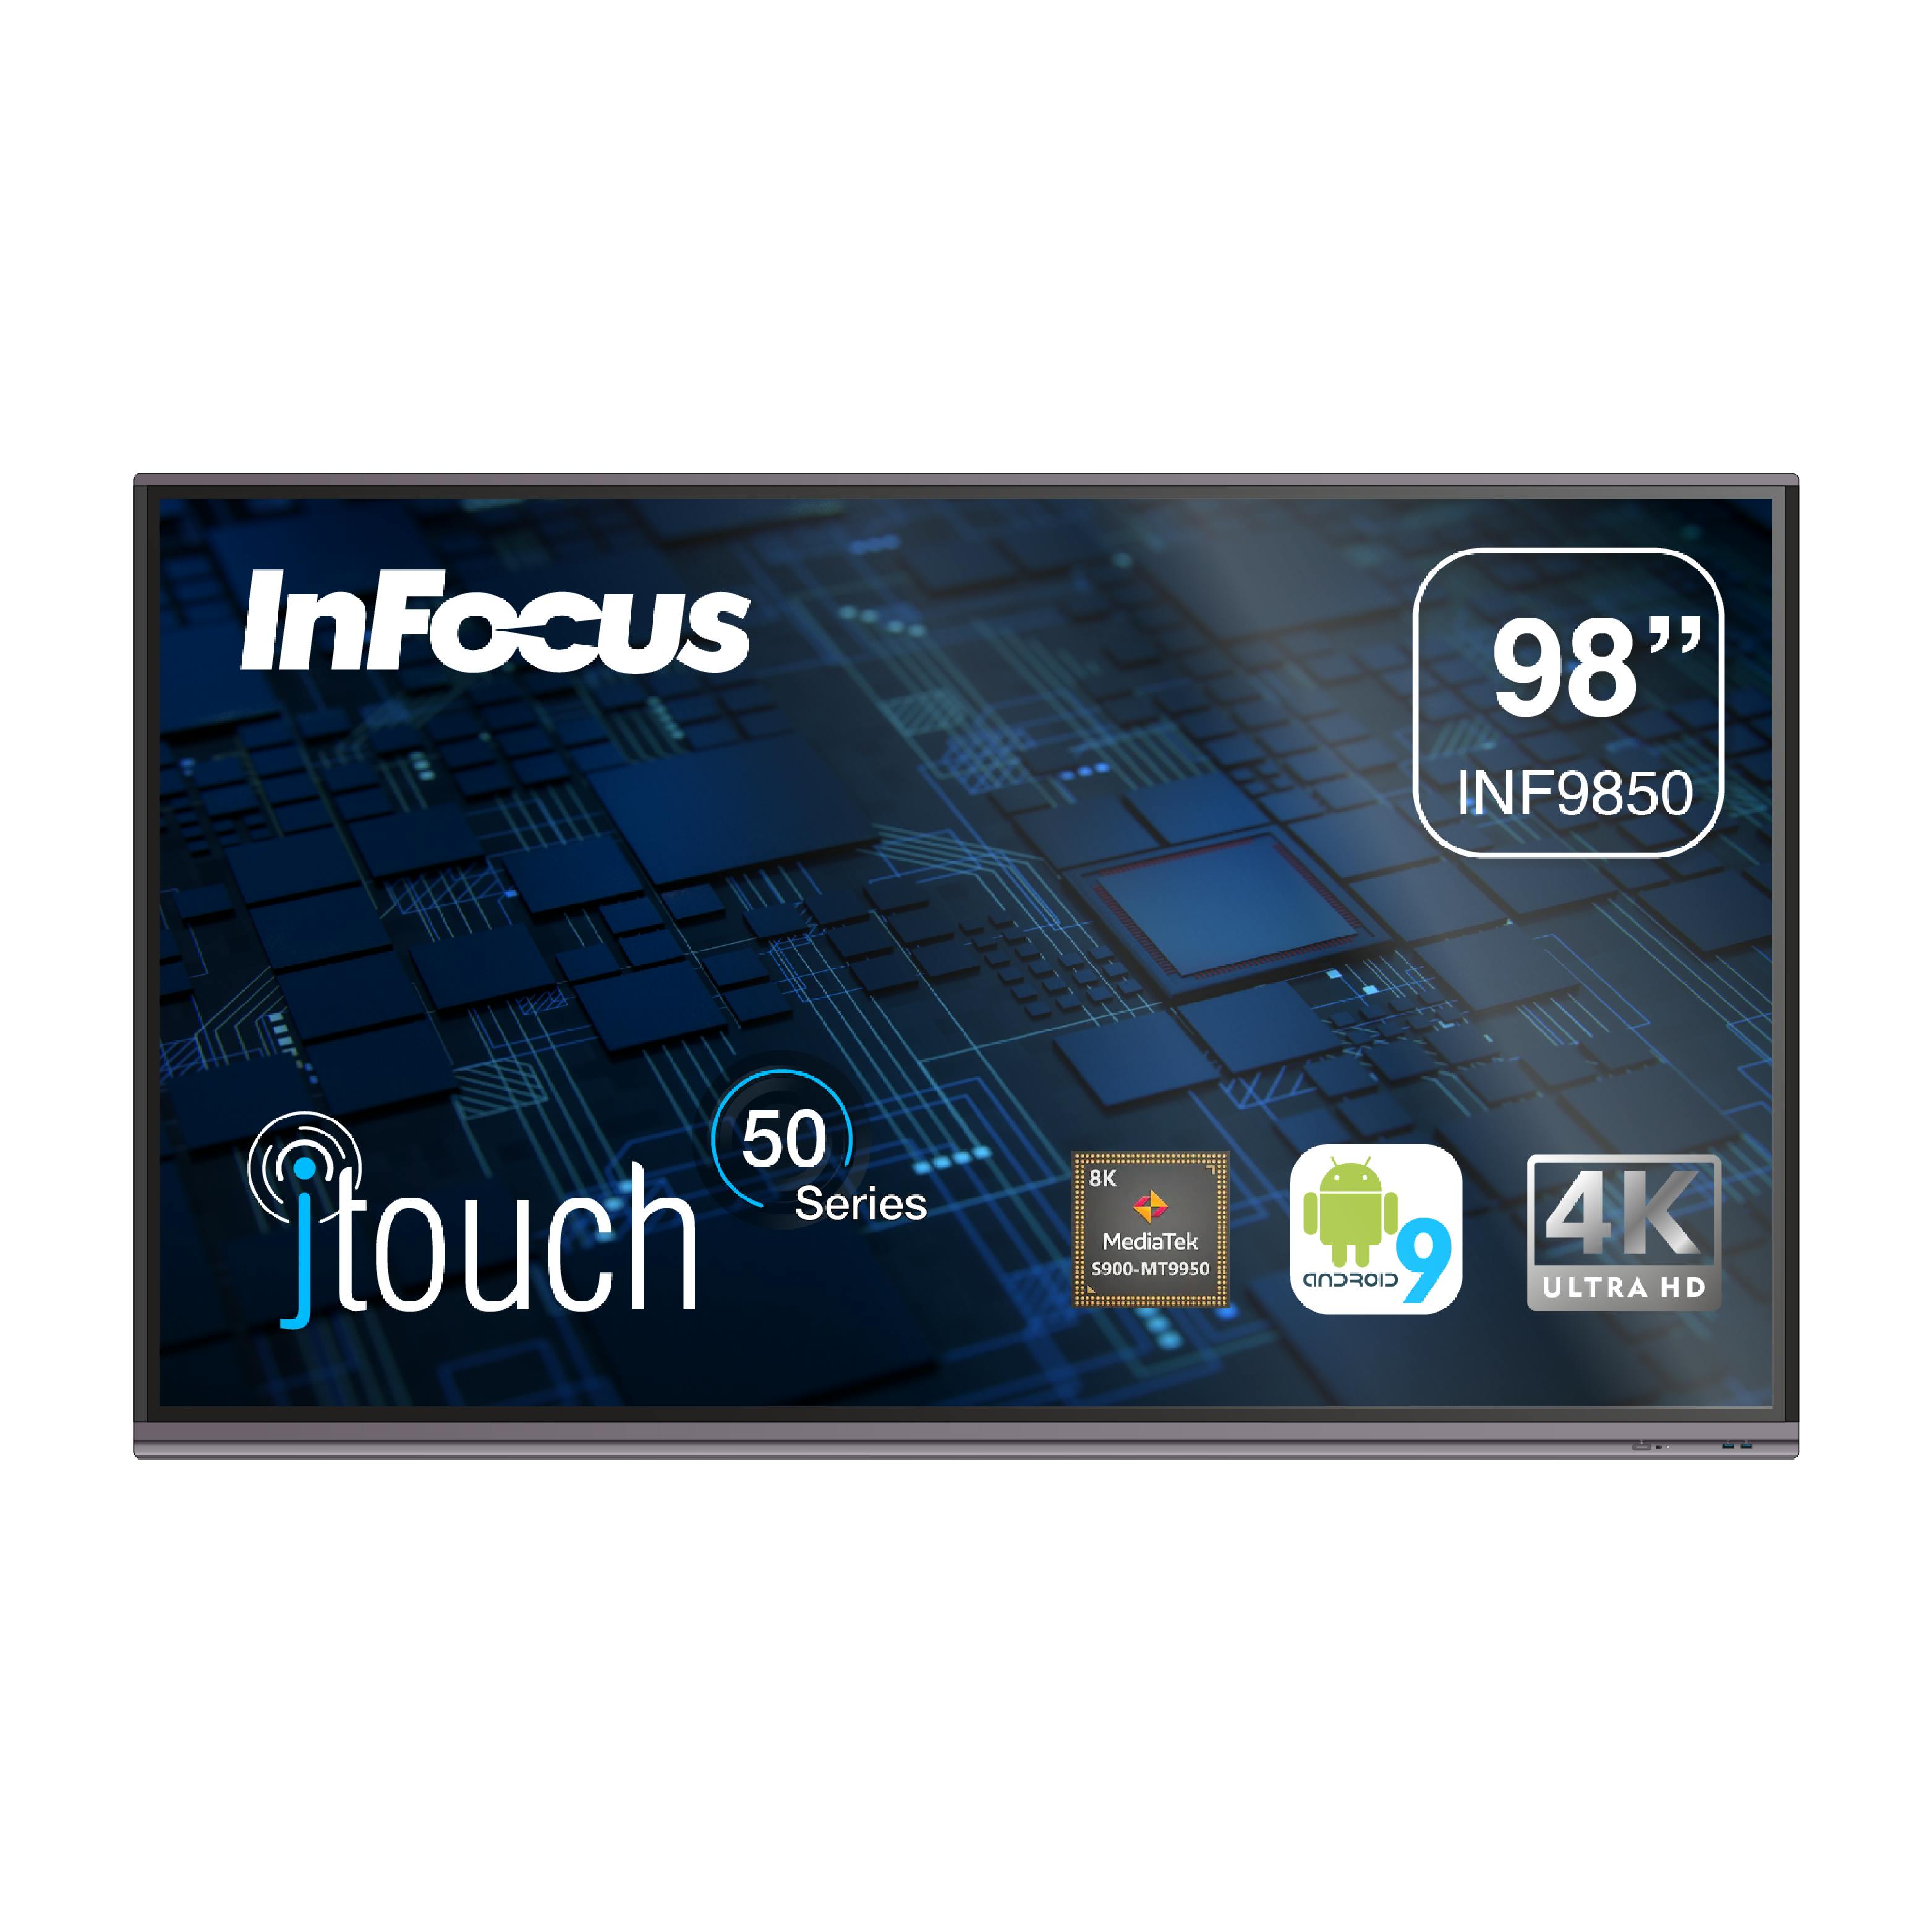 https://infocus.imgix.net/2022/04/JTouch-50-Series_INF9850_F_90-01.png?auto=compress%2Cformat&ixlib=php-3.3.0